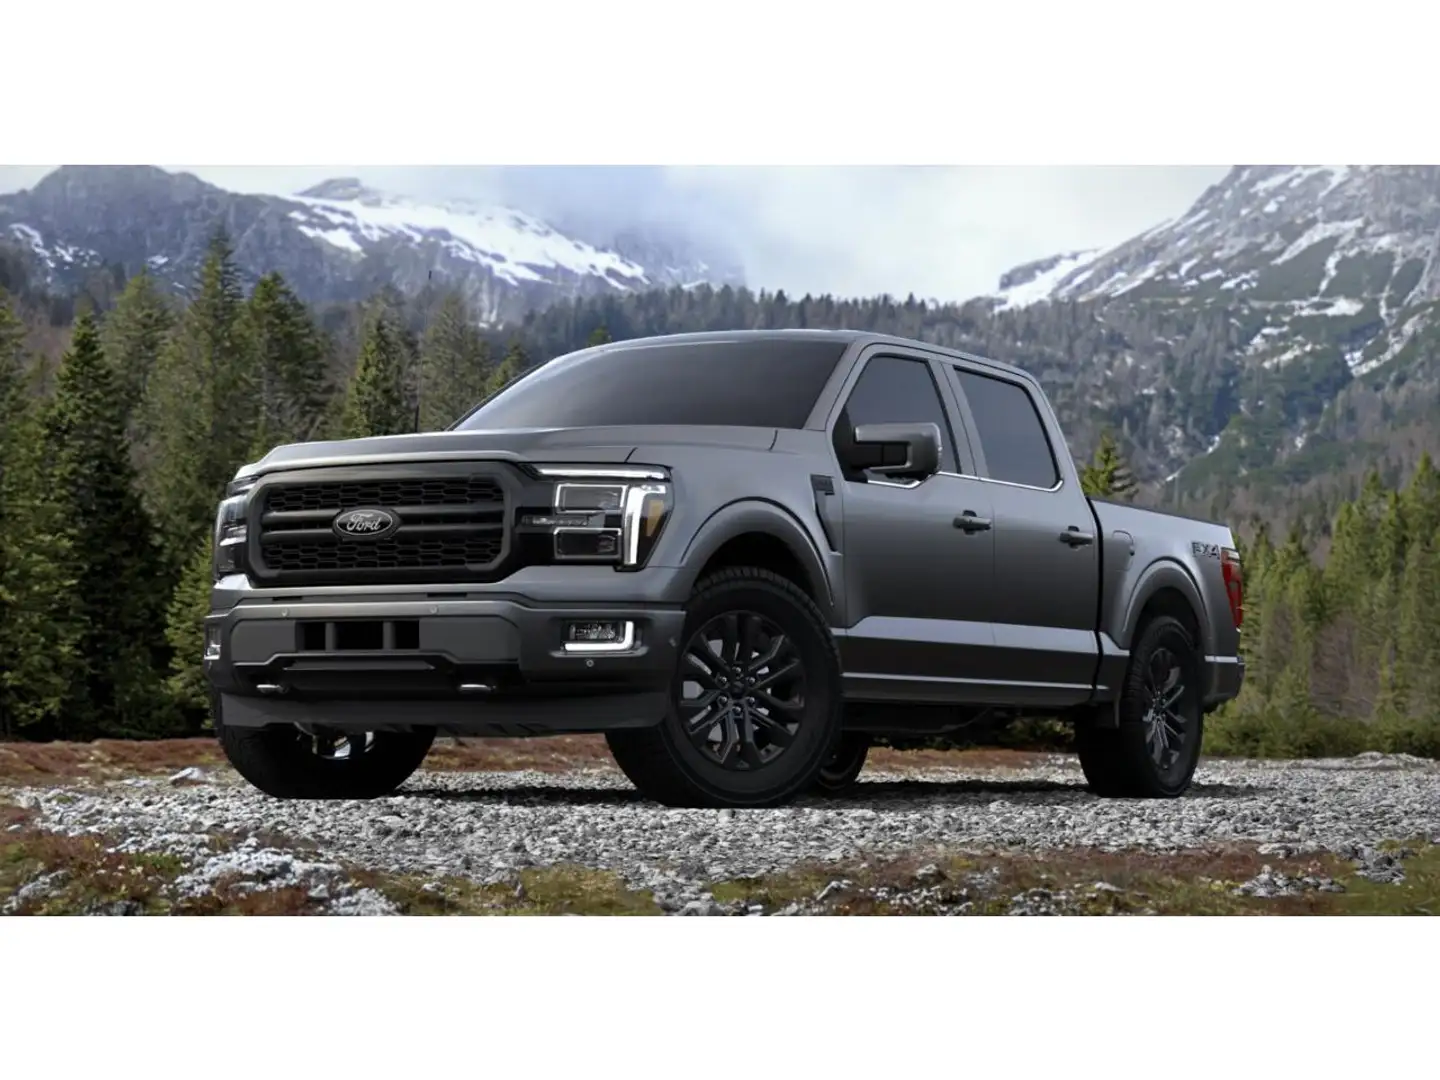 Ford F 150 Supercrew Lariat Black Package siva - 1